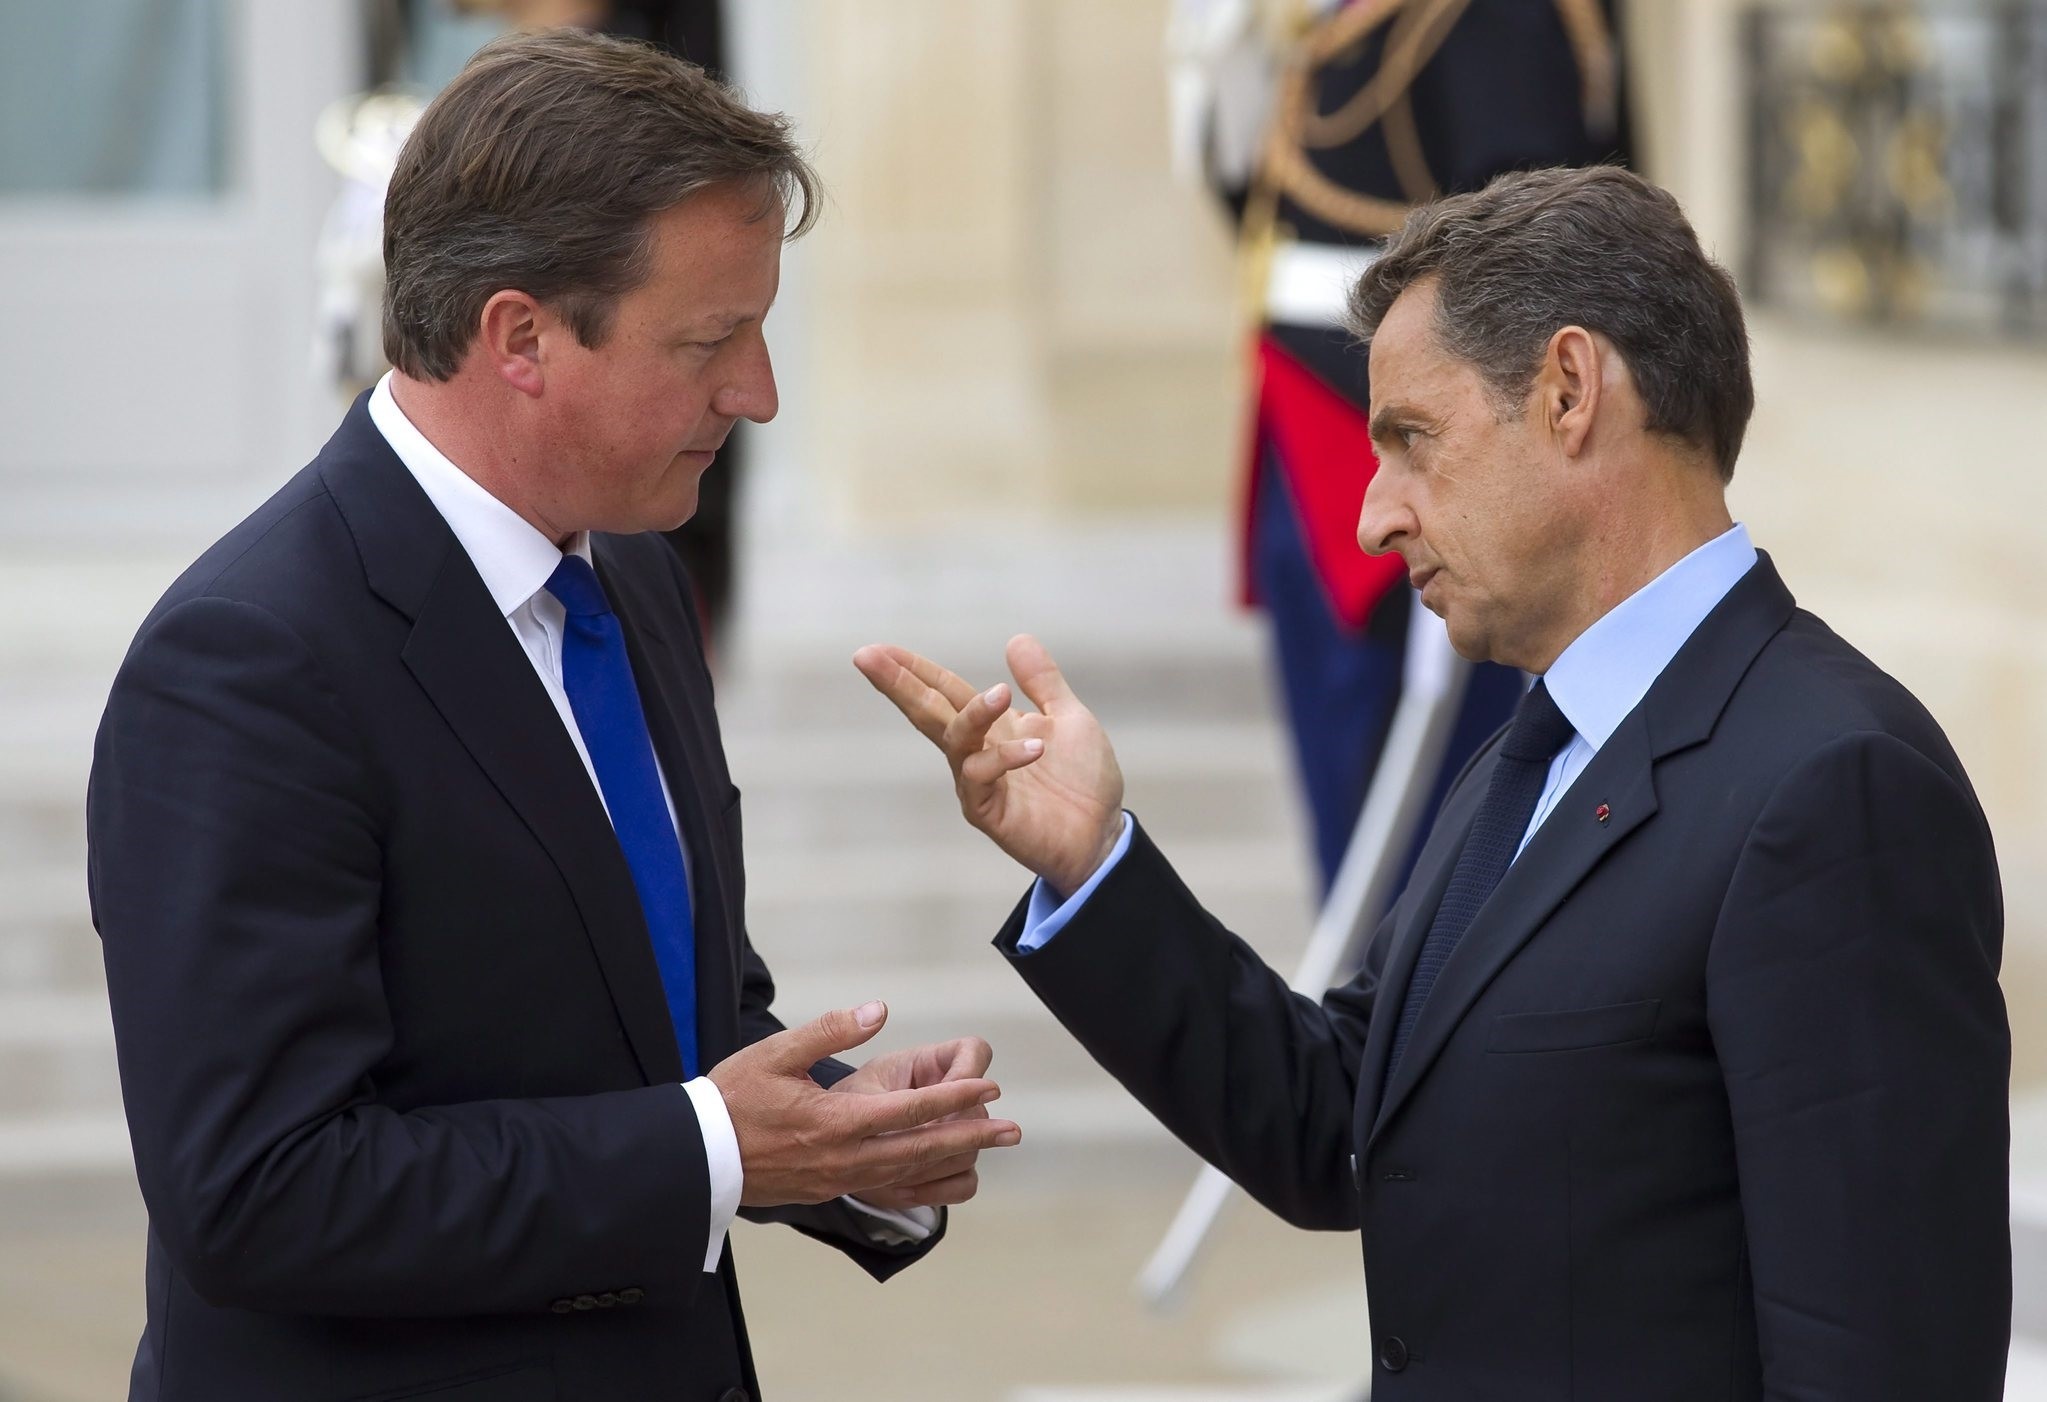 French President Nicolas Sarkozy (R) and Britain's Prime Minister David Cameron (L) before a conference on Libya at the Elysee Palace in Paris, France. (EPA Photo)